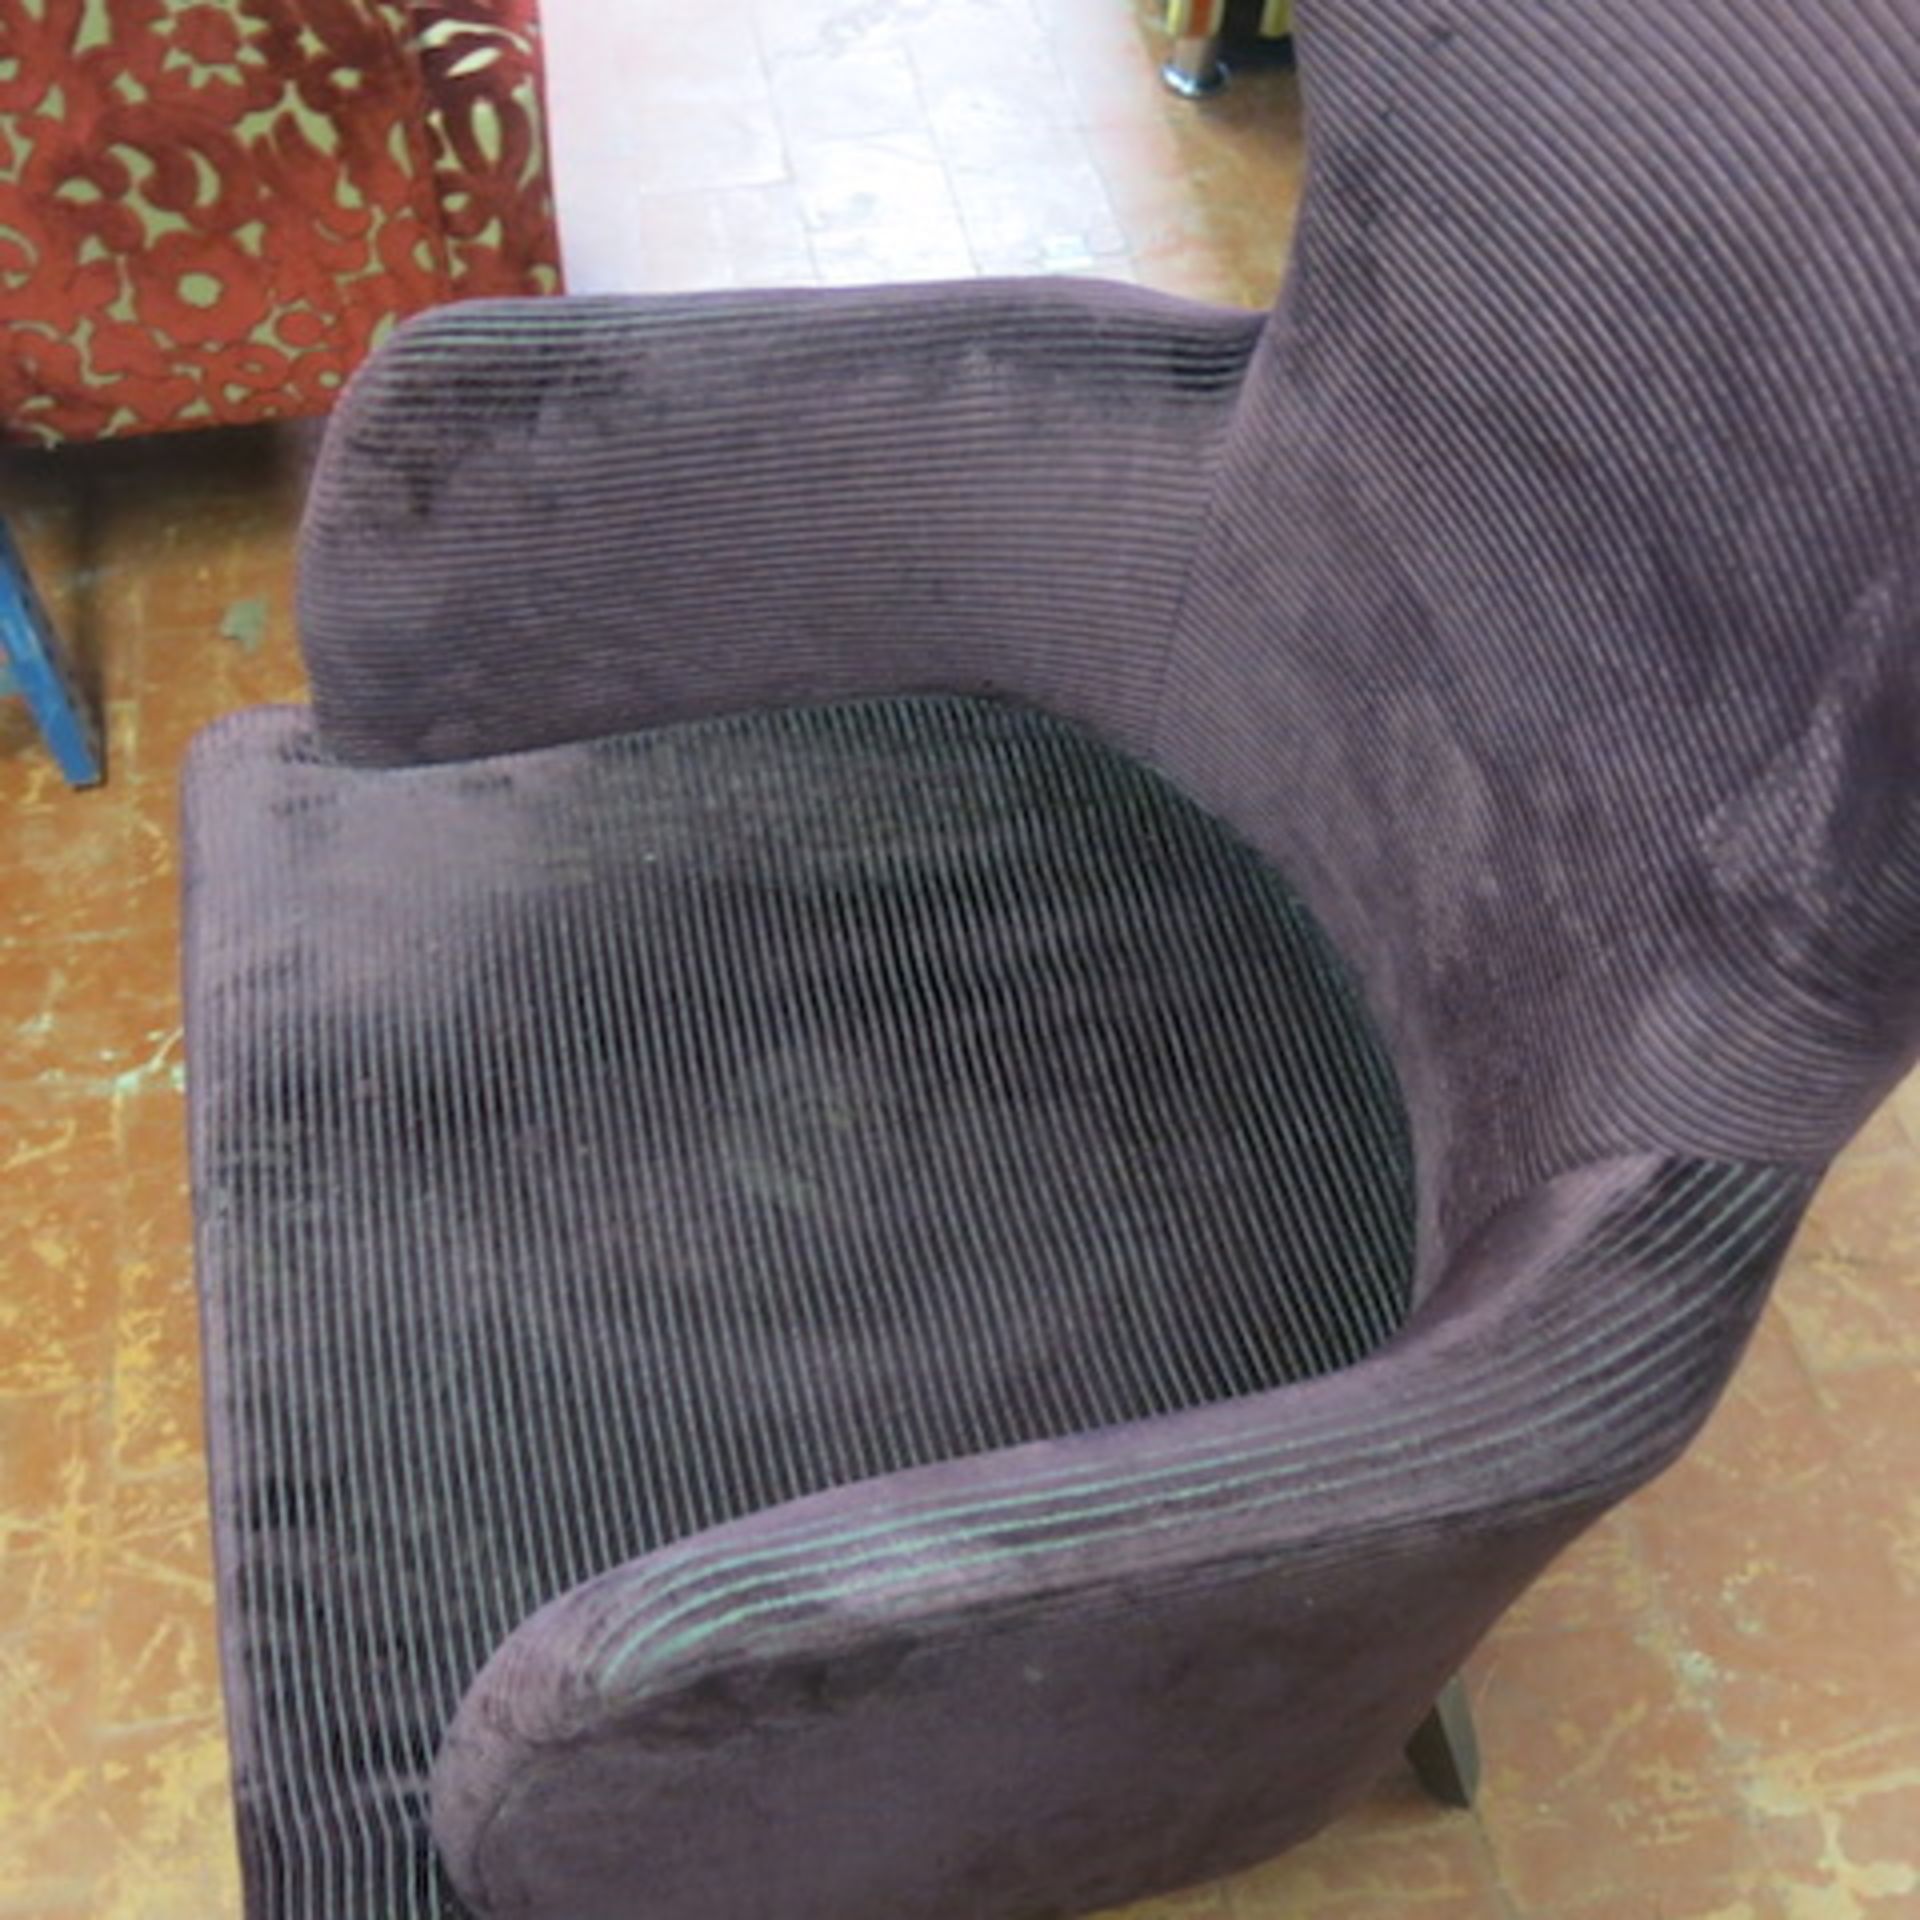 2 x Matching Crushed Velour Armchairs with Assorted Colour Striped Pattern and Plain Seat, Appears - Image 6 of 6